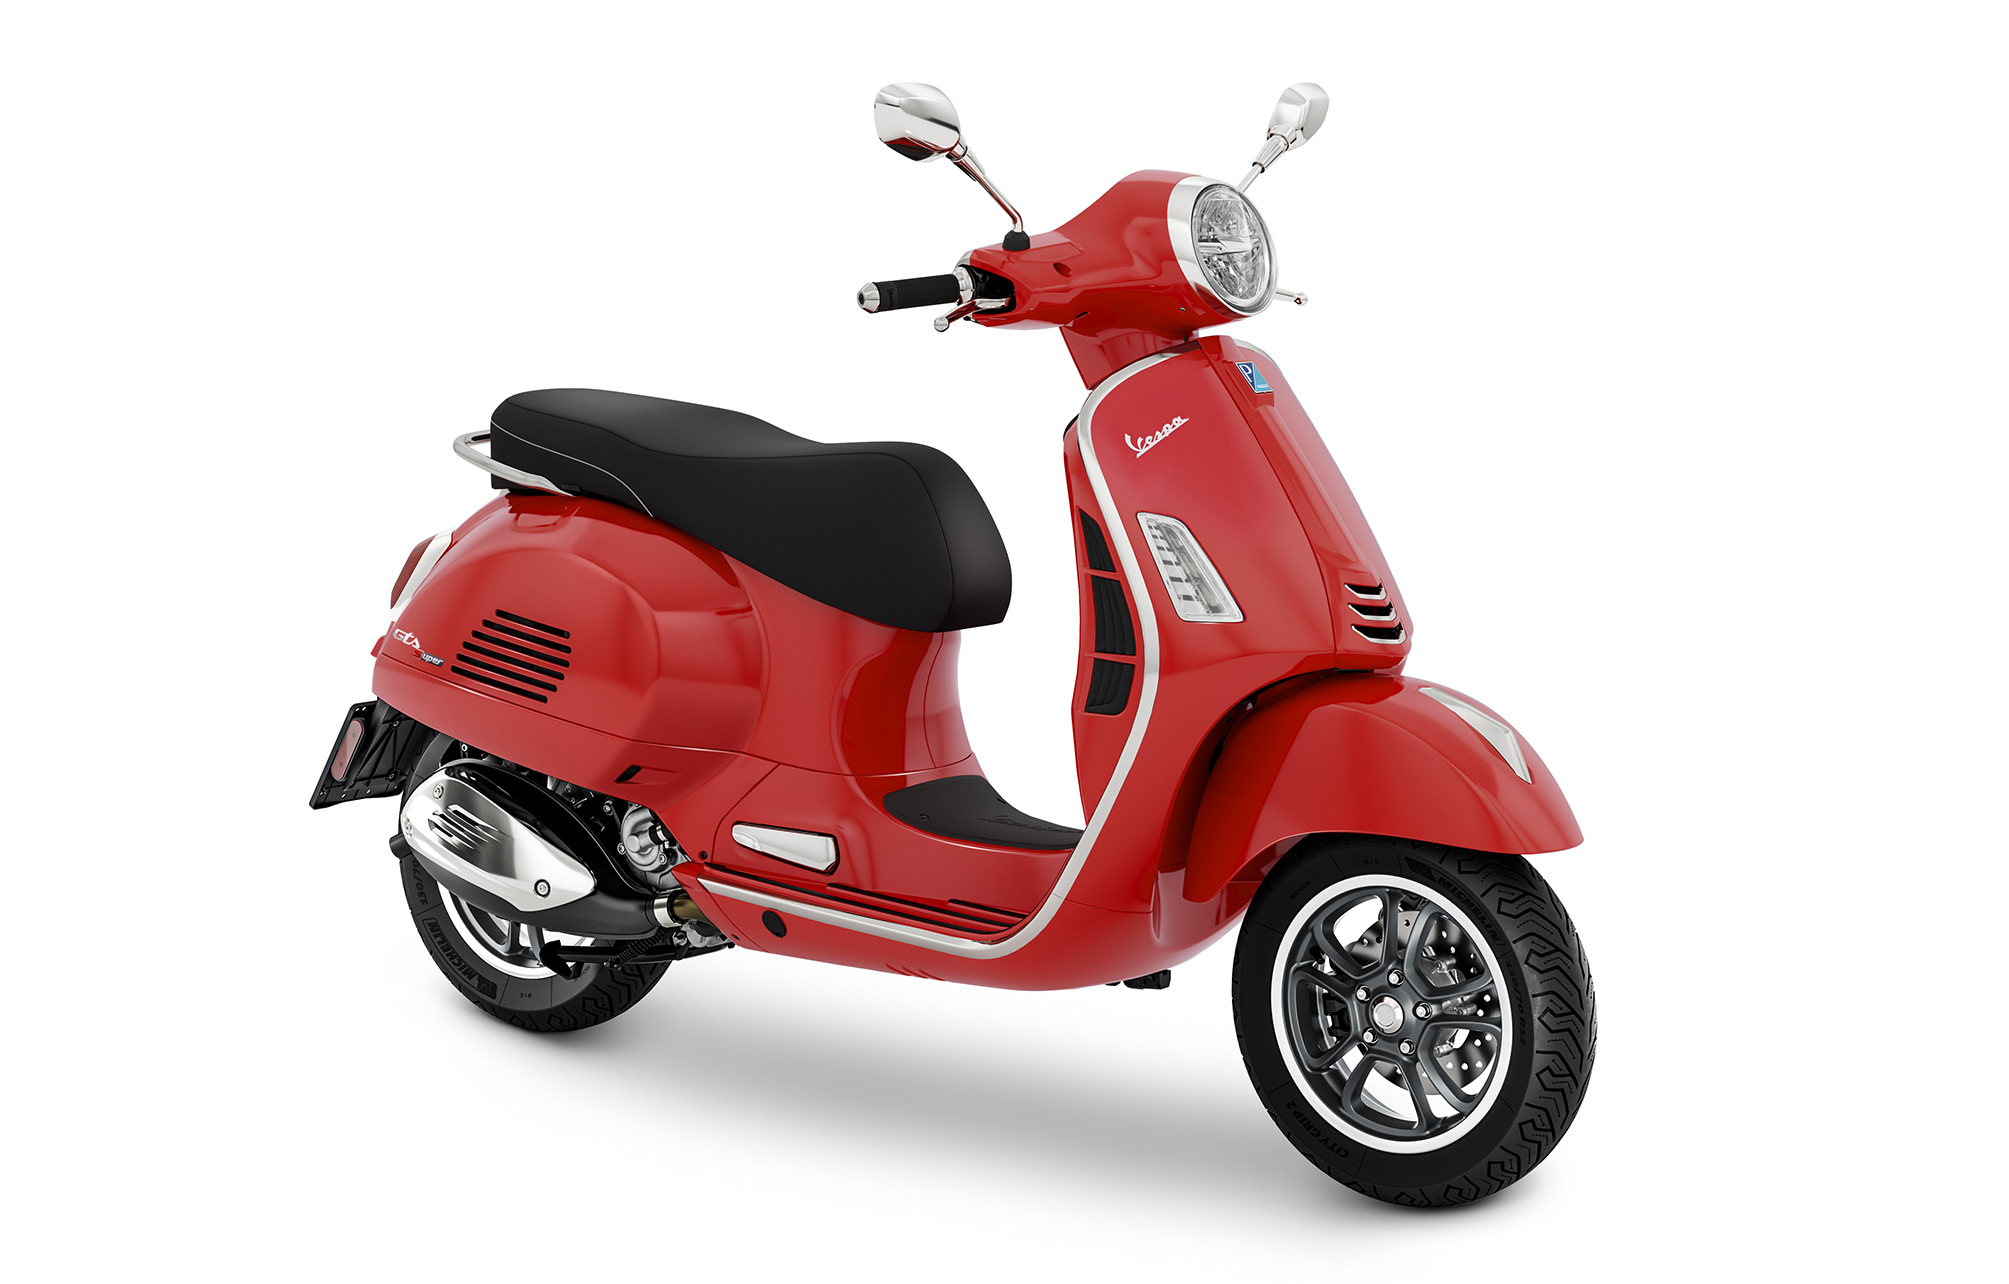 New Vespa GTS is the Ferrari of scooters, and quicker in the city